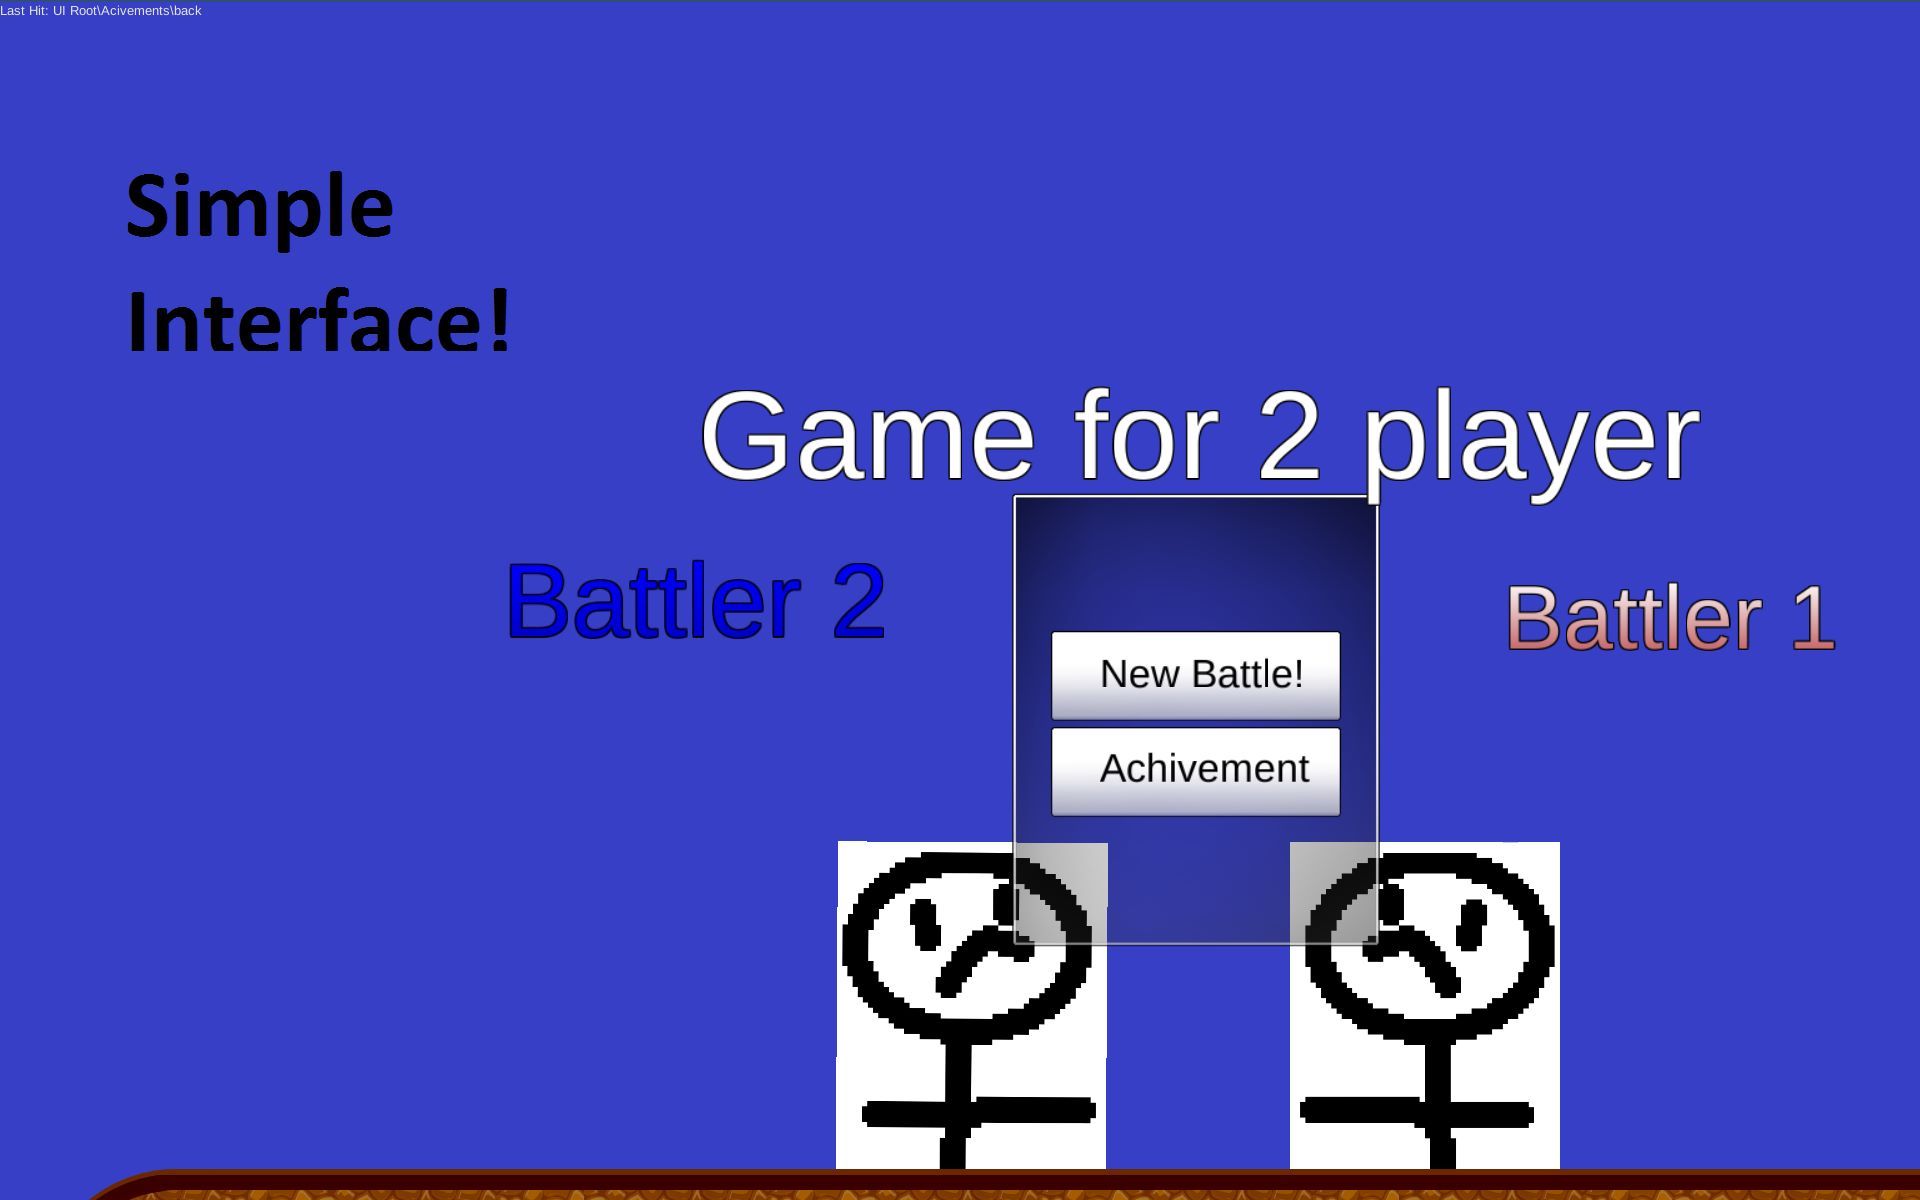 2 Player Battle Arena!